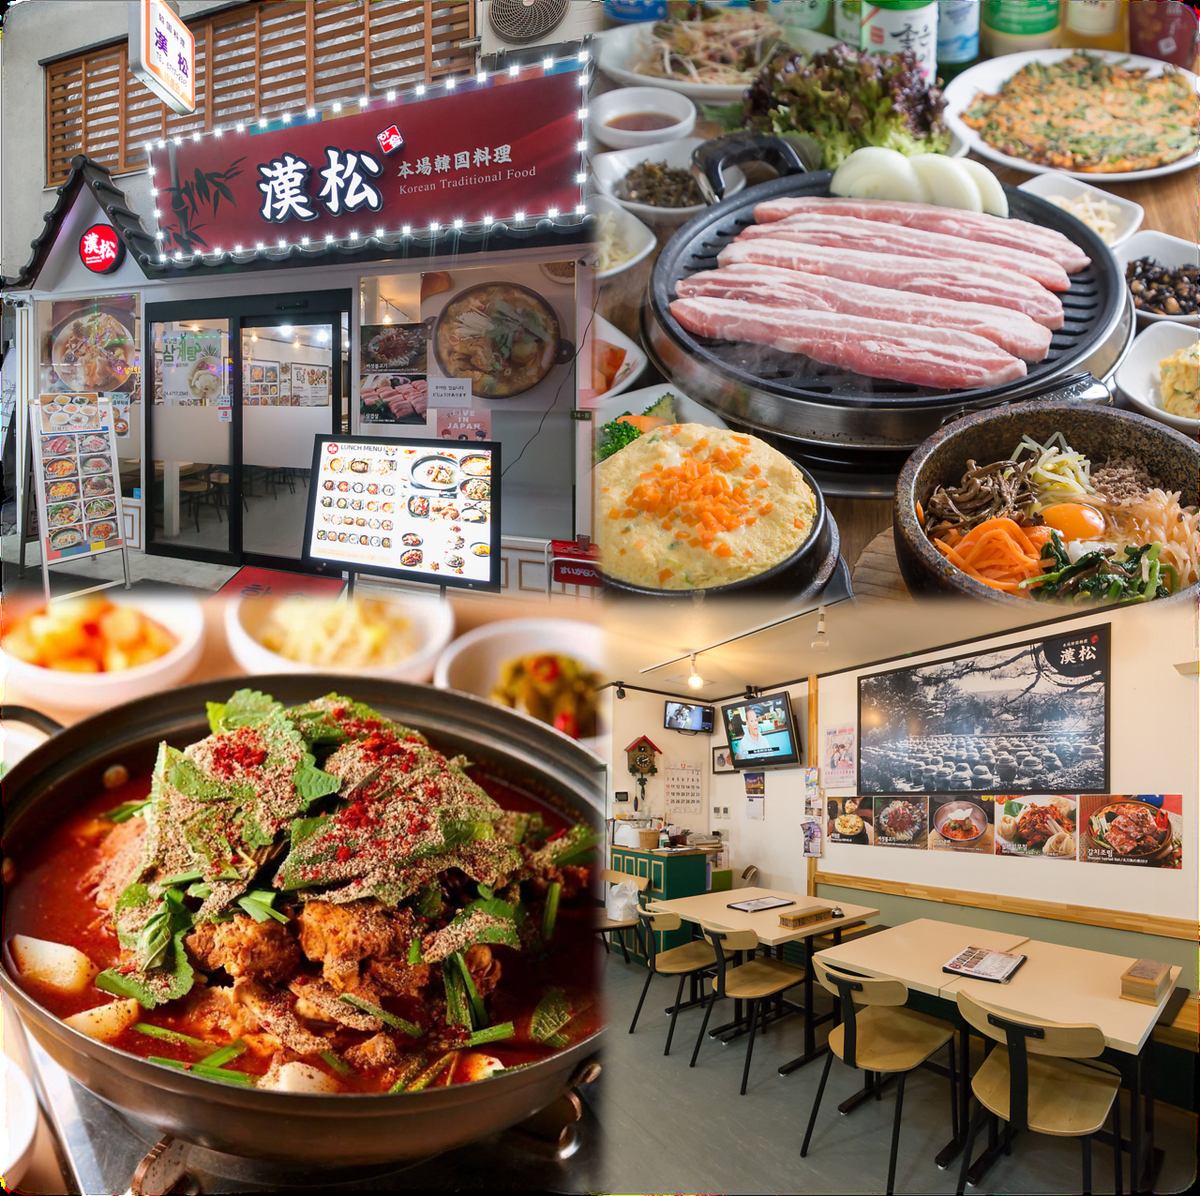 If you want to enjoy the authentic taste, try the traditional Korean food made by Hansong's mom!